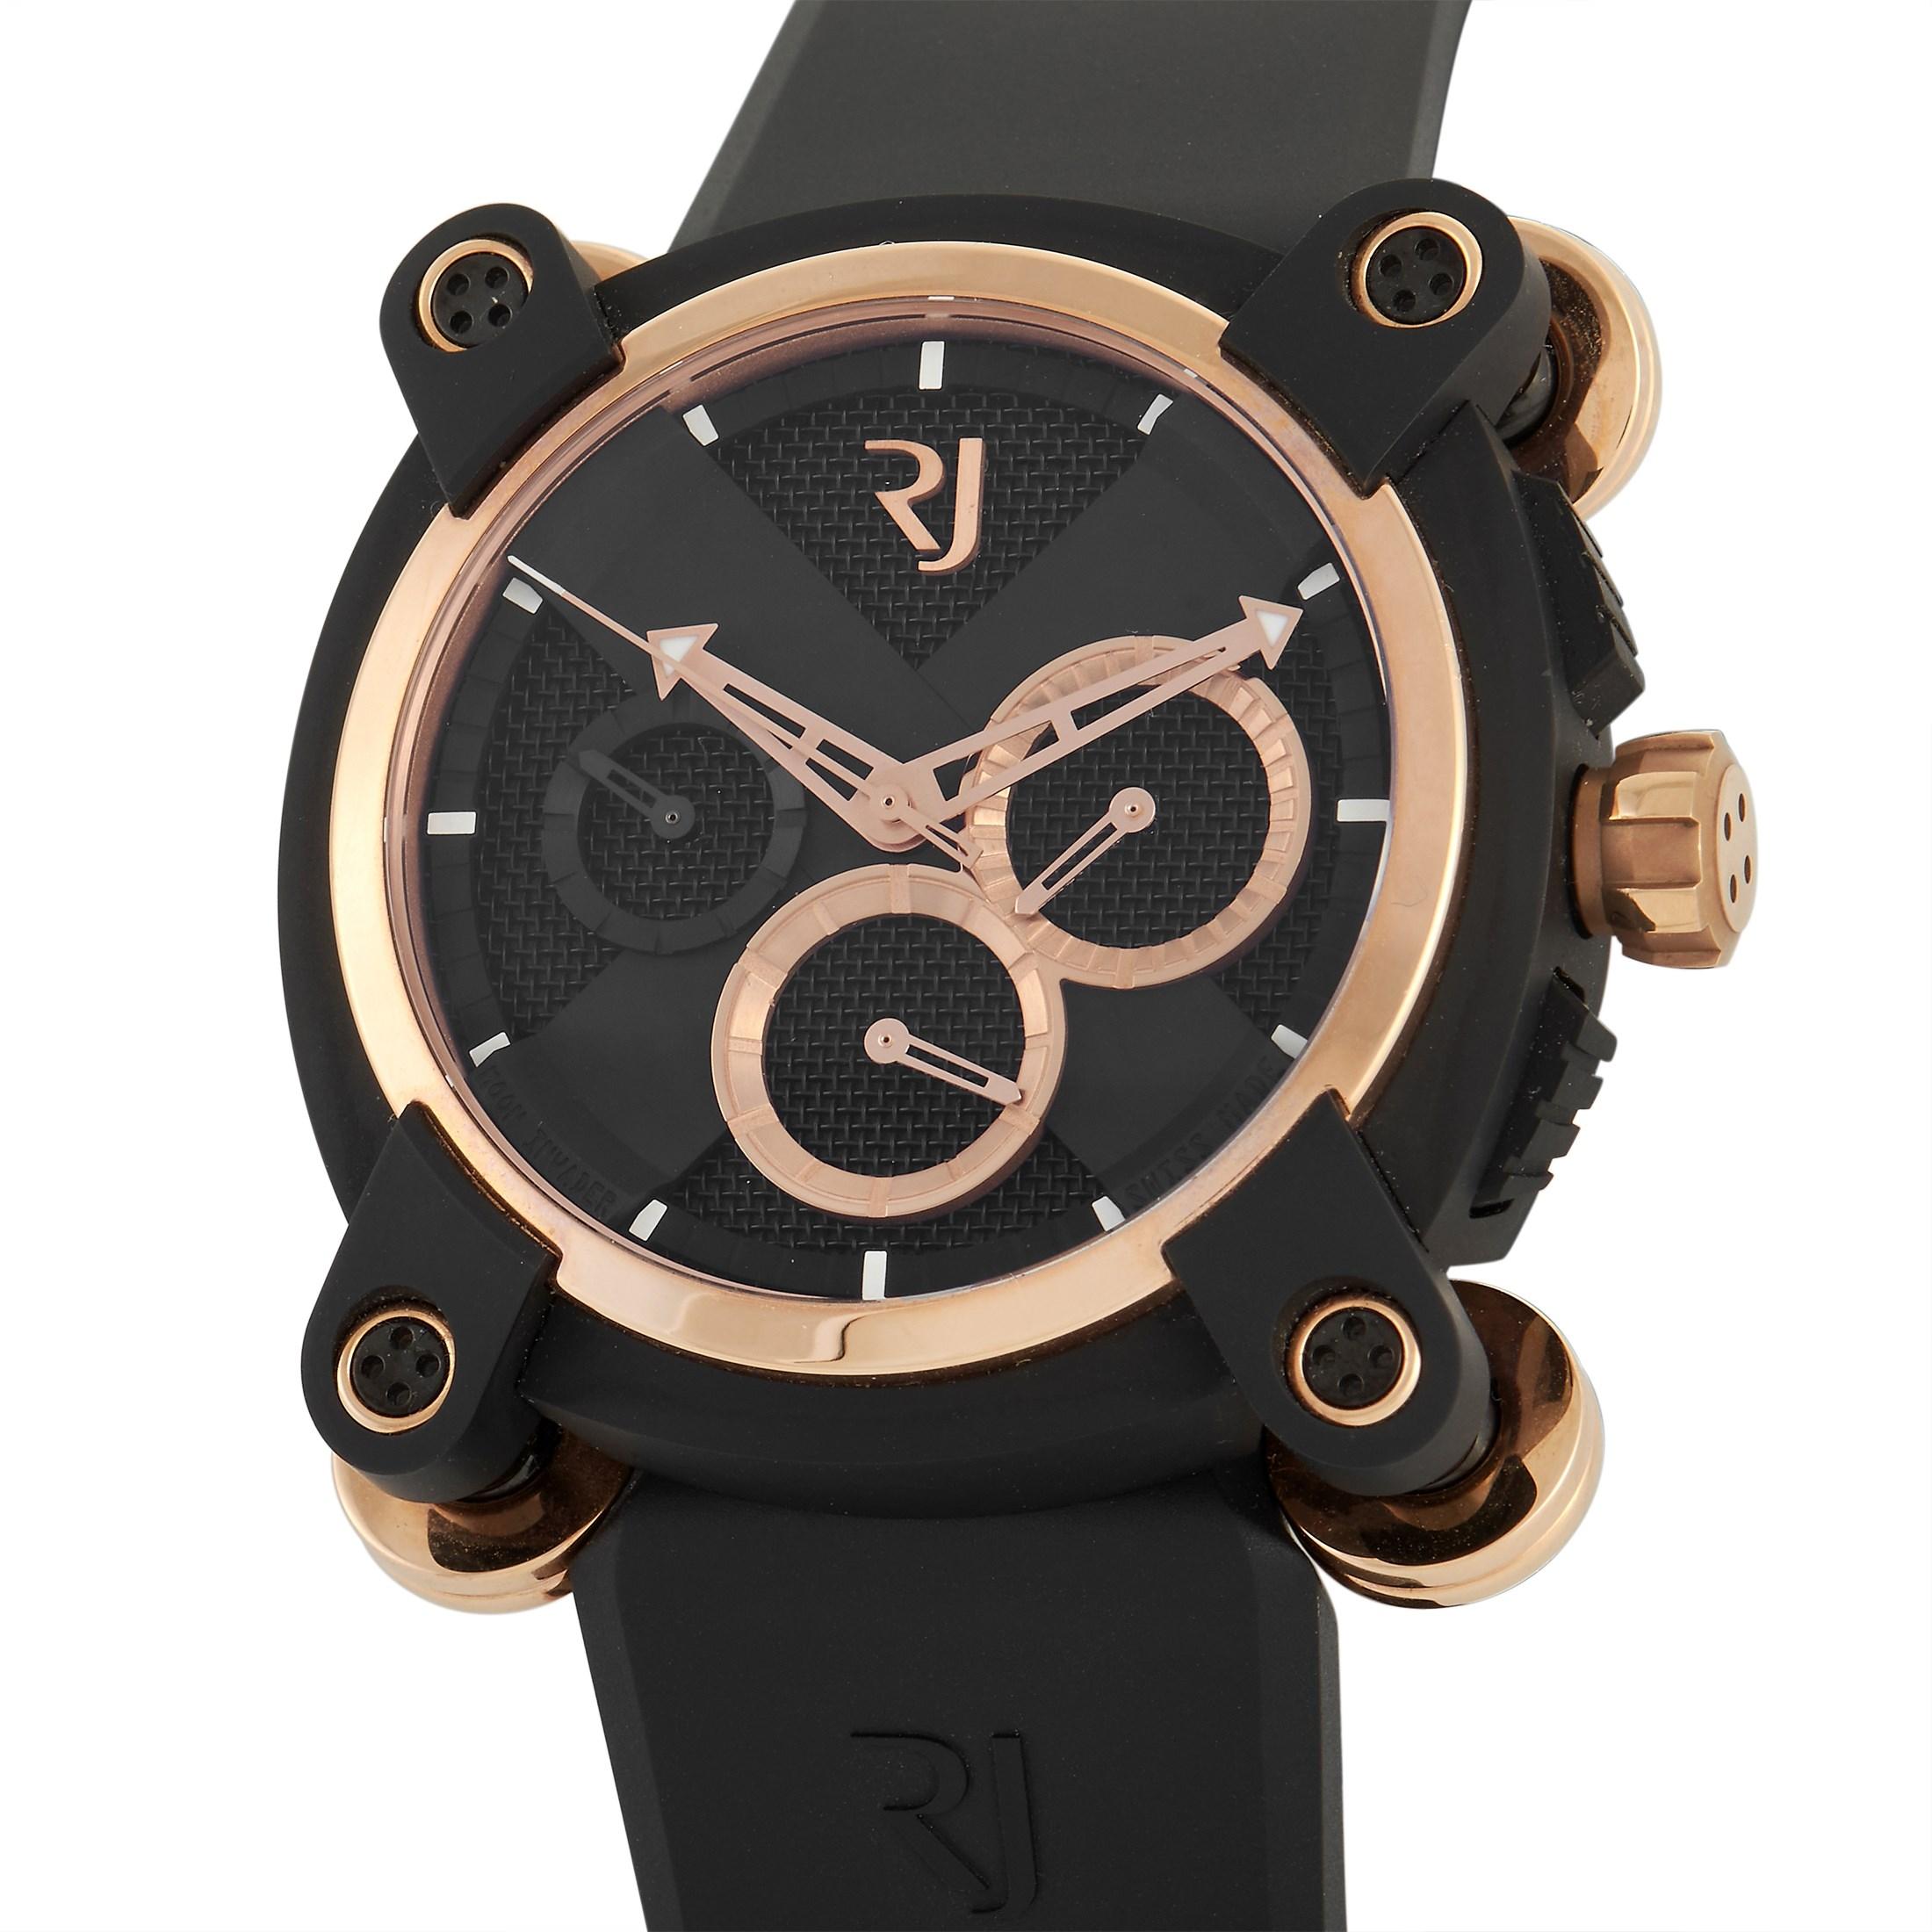 The Romain Jerome Watch, reference number RJ.M.CH.IN.004.02, is unlike anything you have ever experienced. 

Impeccable 18K rose gold accents set this watch apart in the best way possible. This watch’s 46mm case is crafted from a combination of 18K